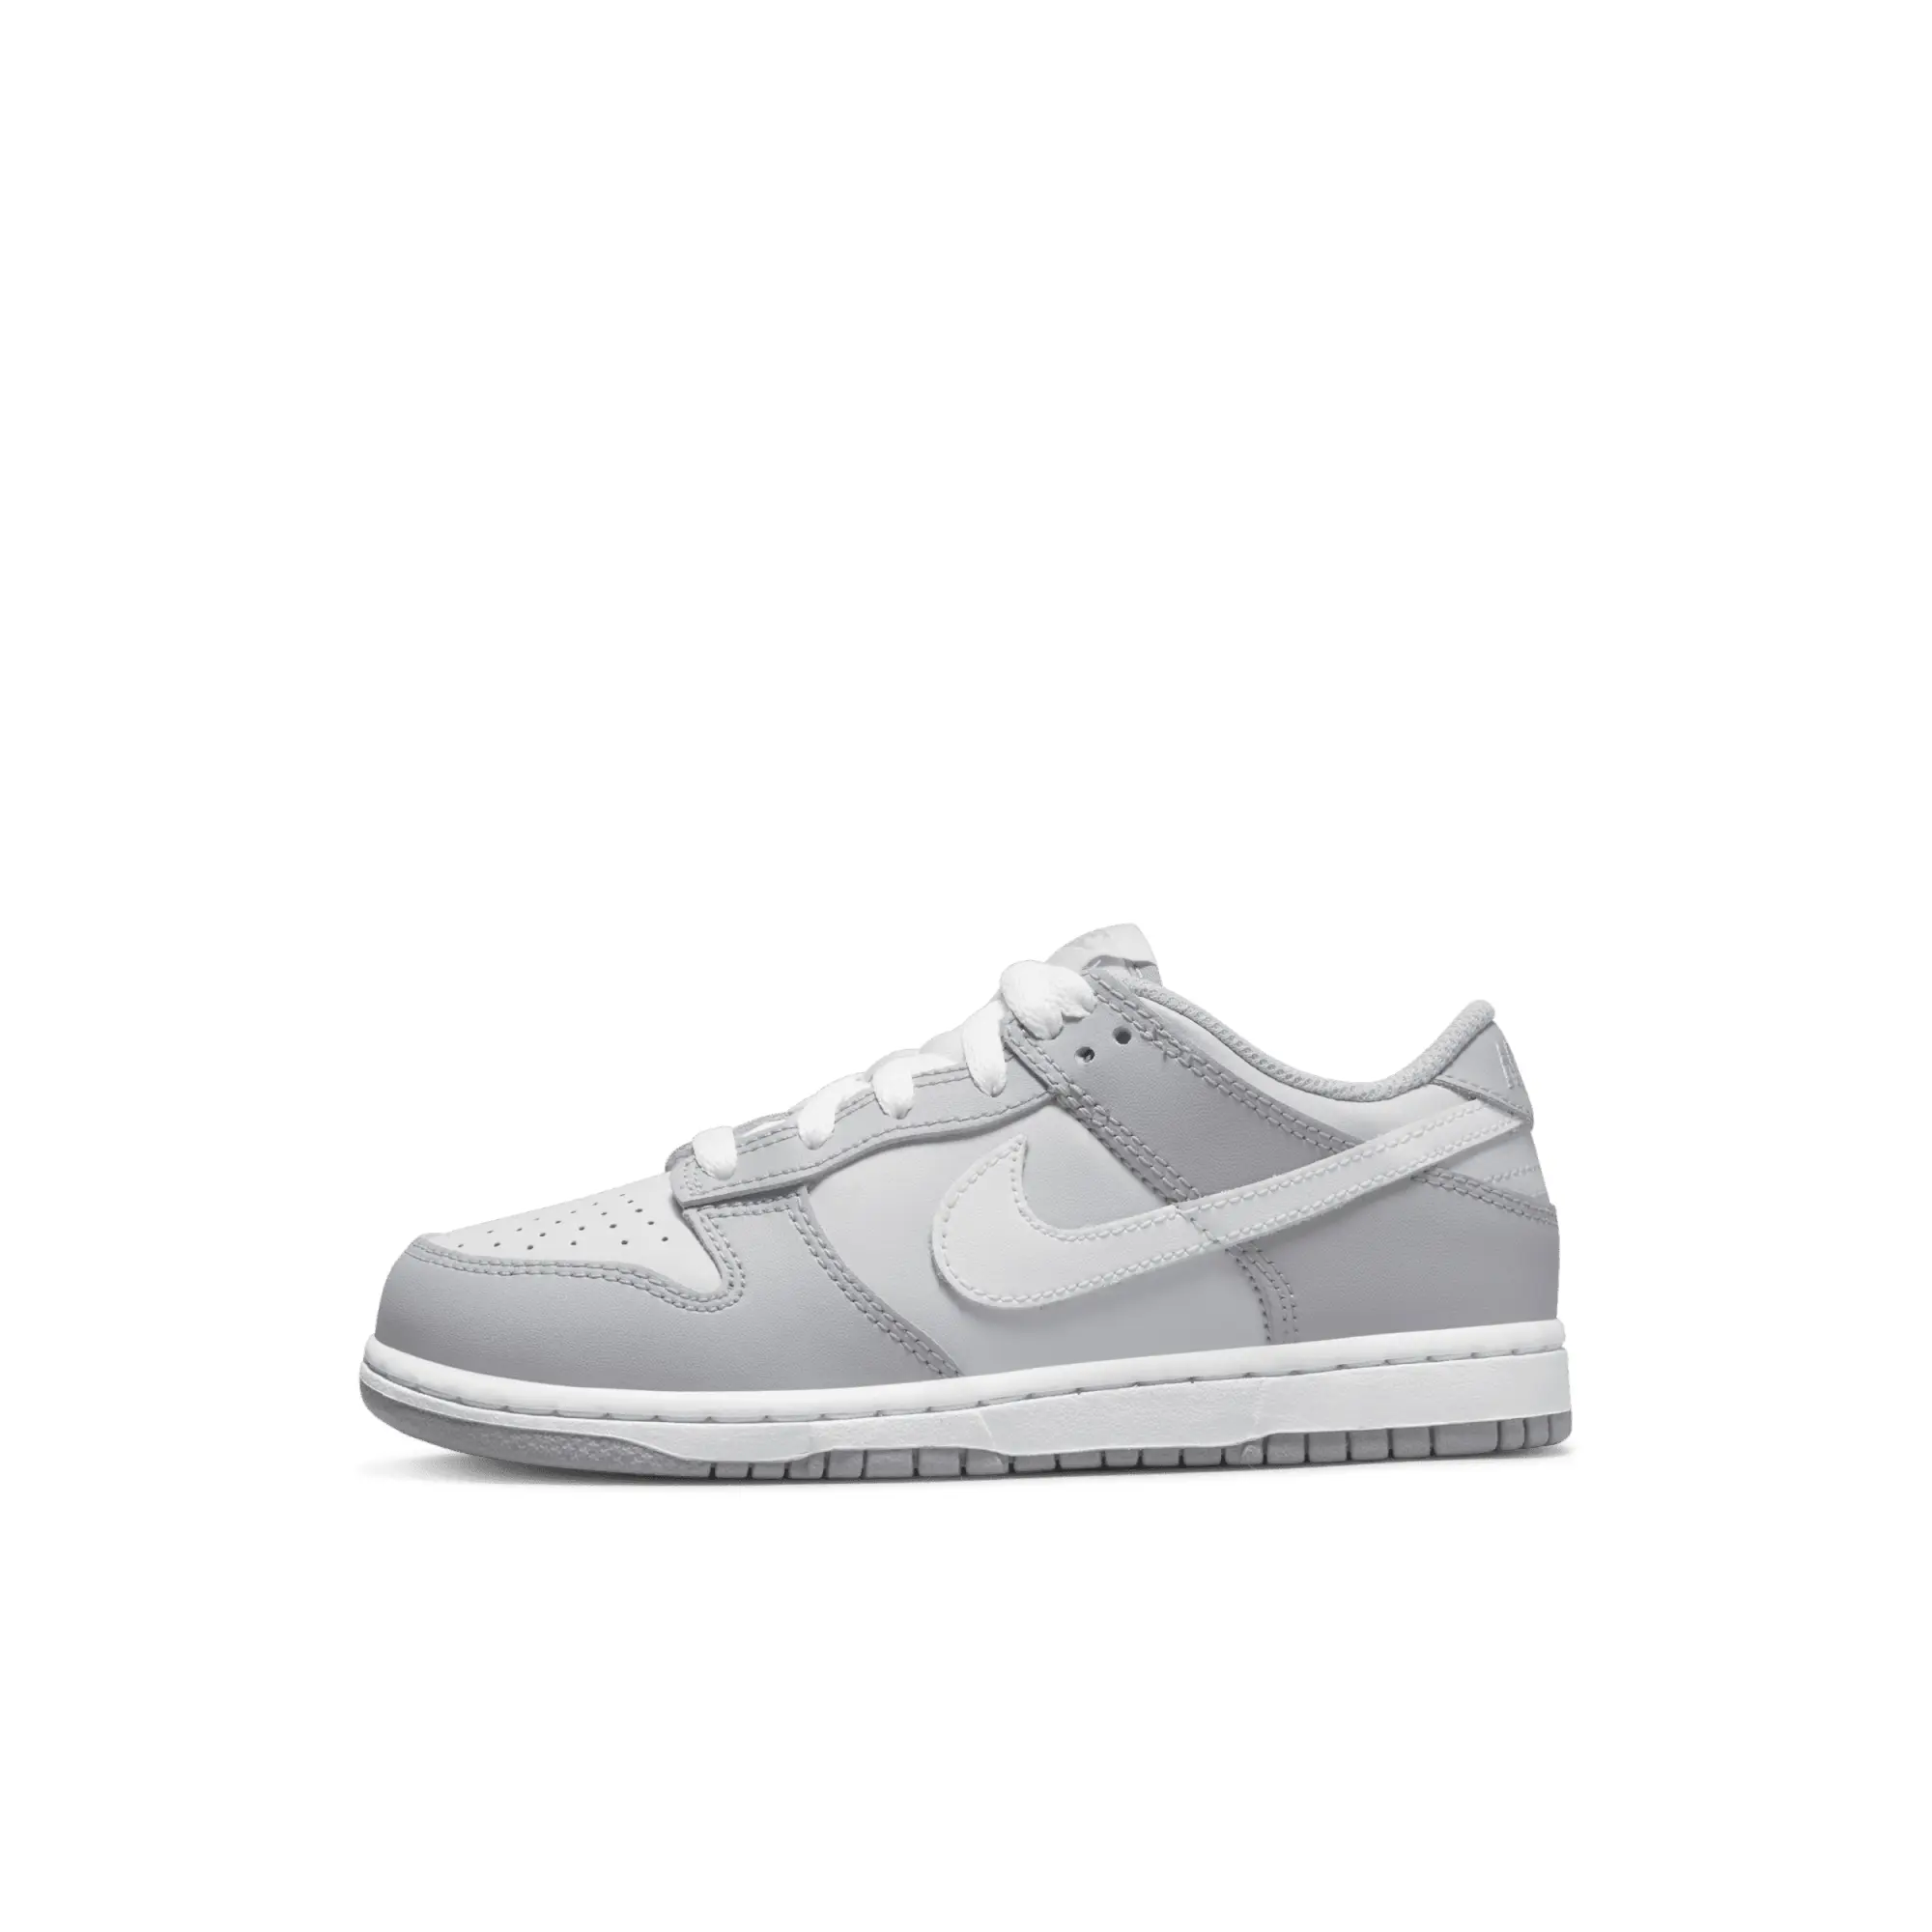 Nike Dunk Low Younger Kids' Shoes - Grey